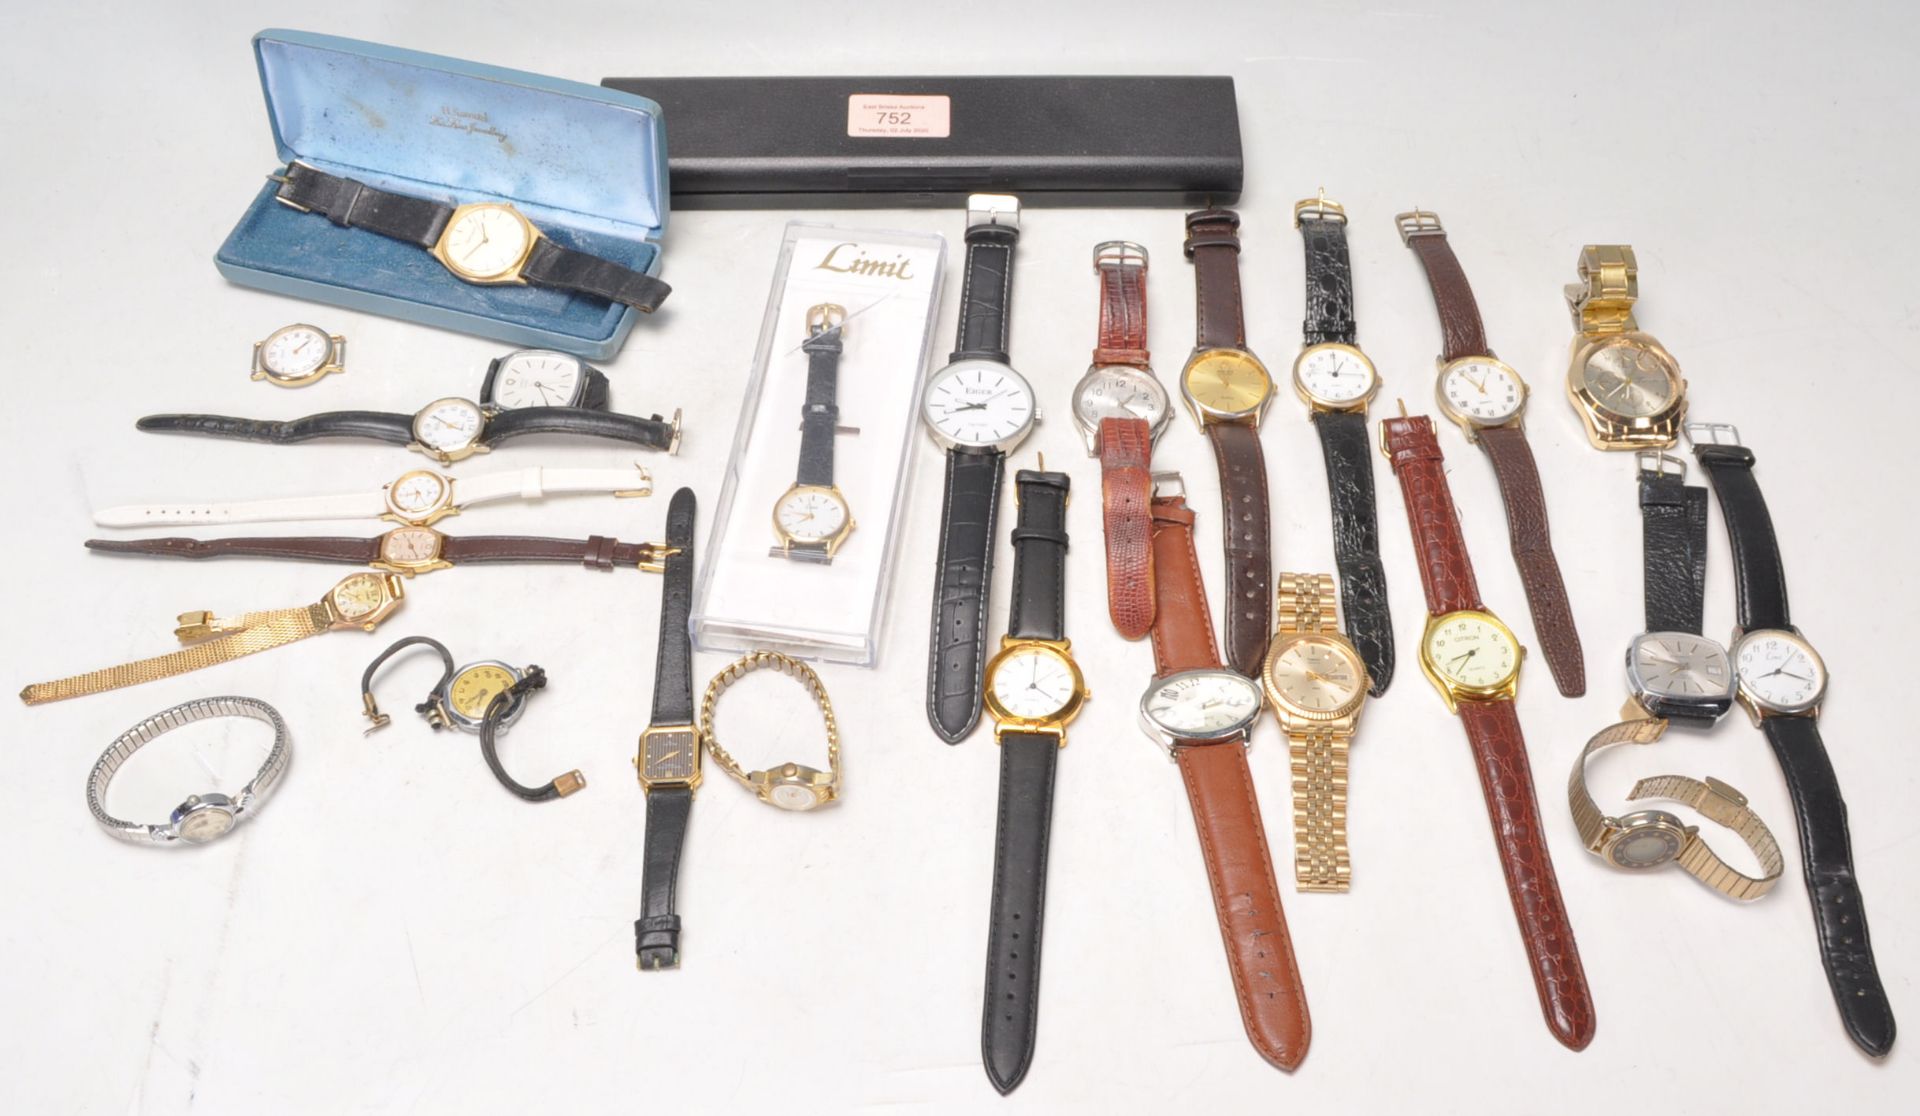 A collection of vintage mixed watches of various styles, brands include Limit, Everite, Ingersoll,